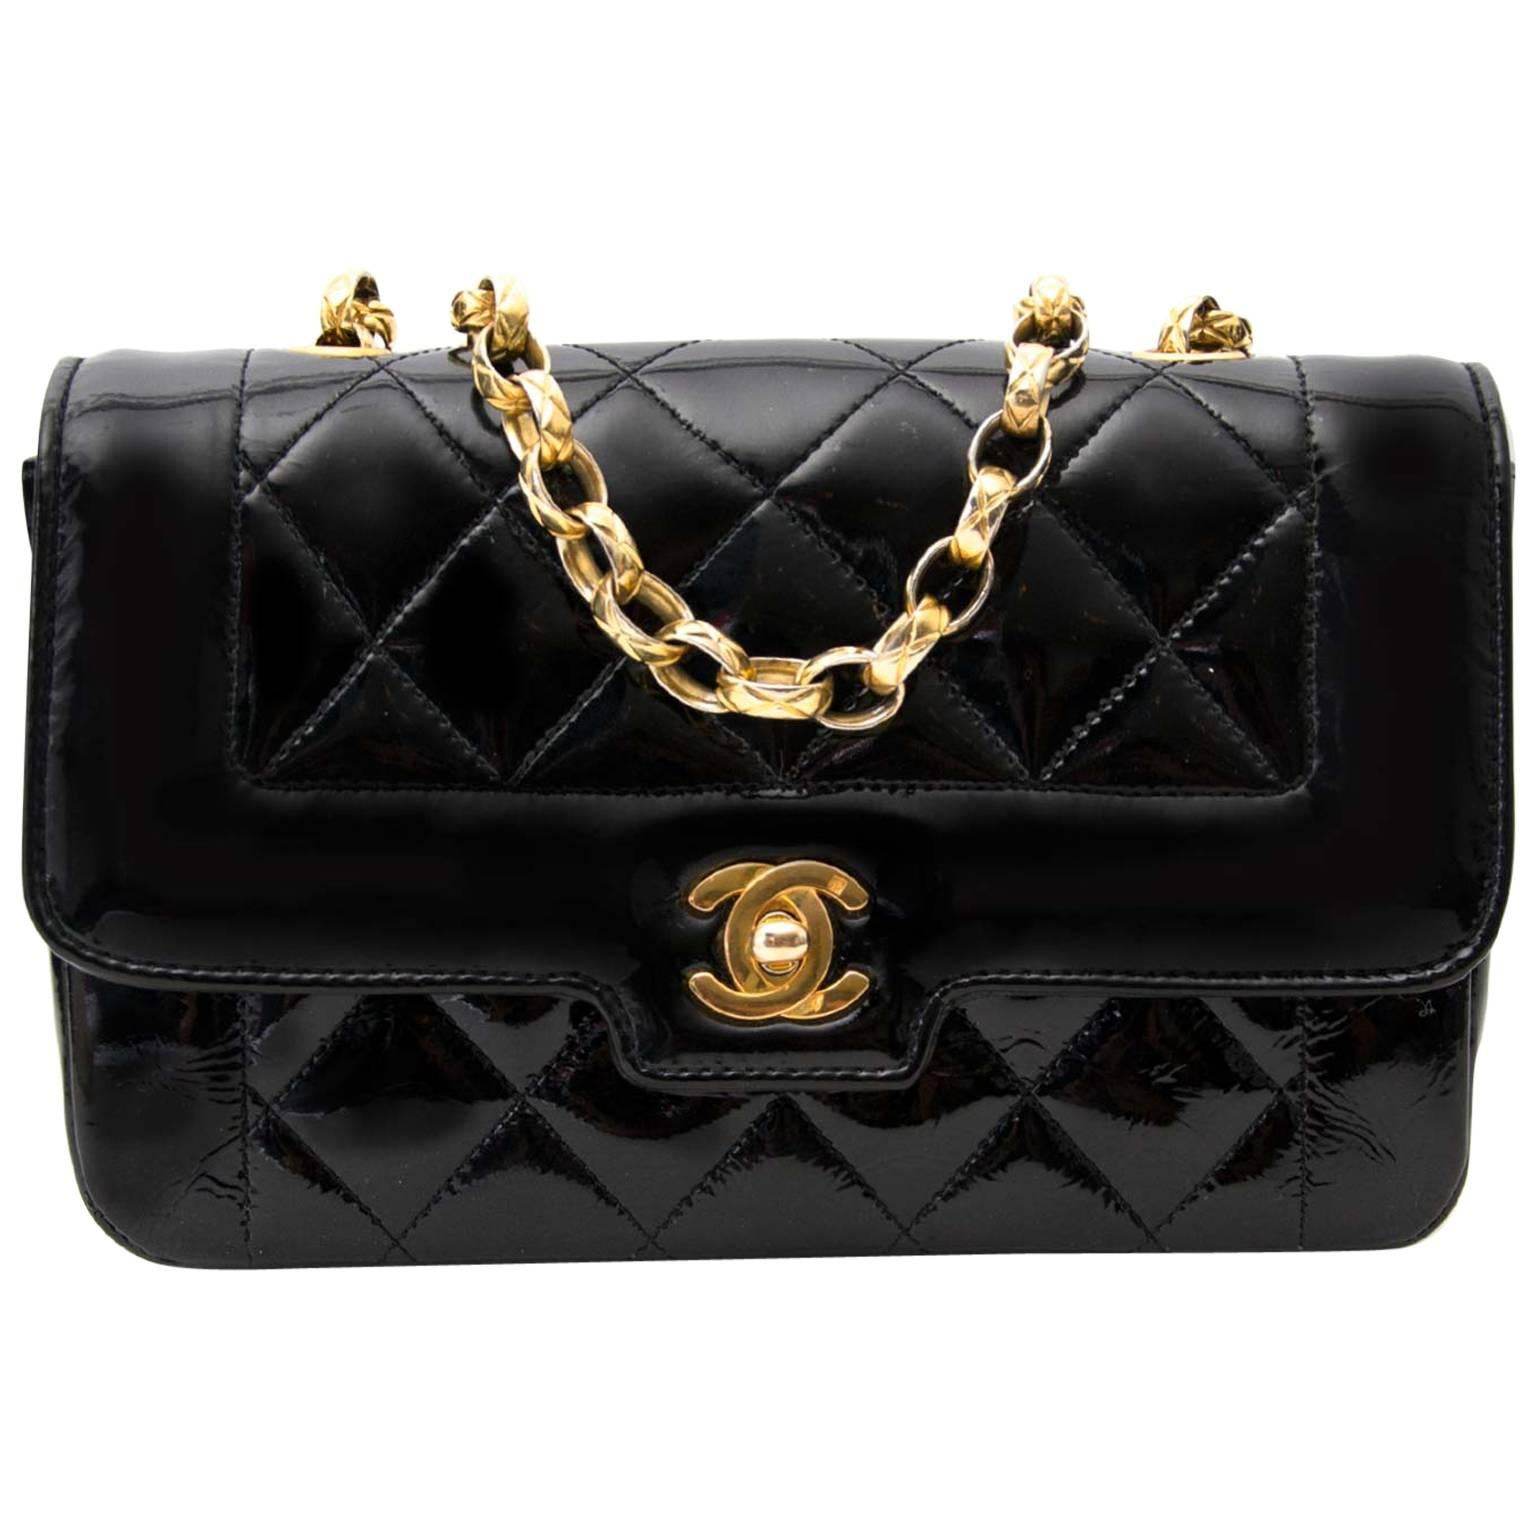 Chanel Black Patent Leather Chain Bag